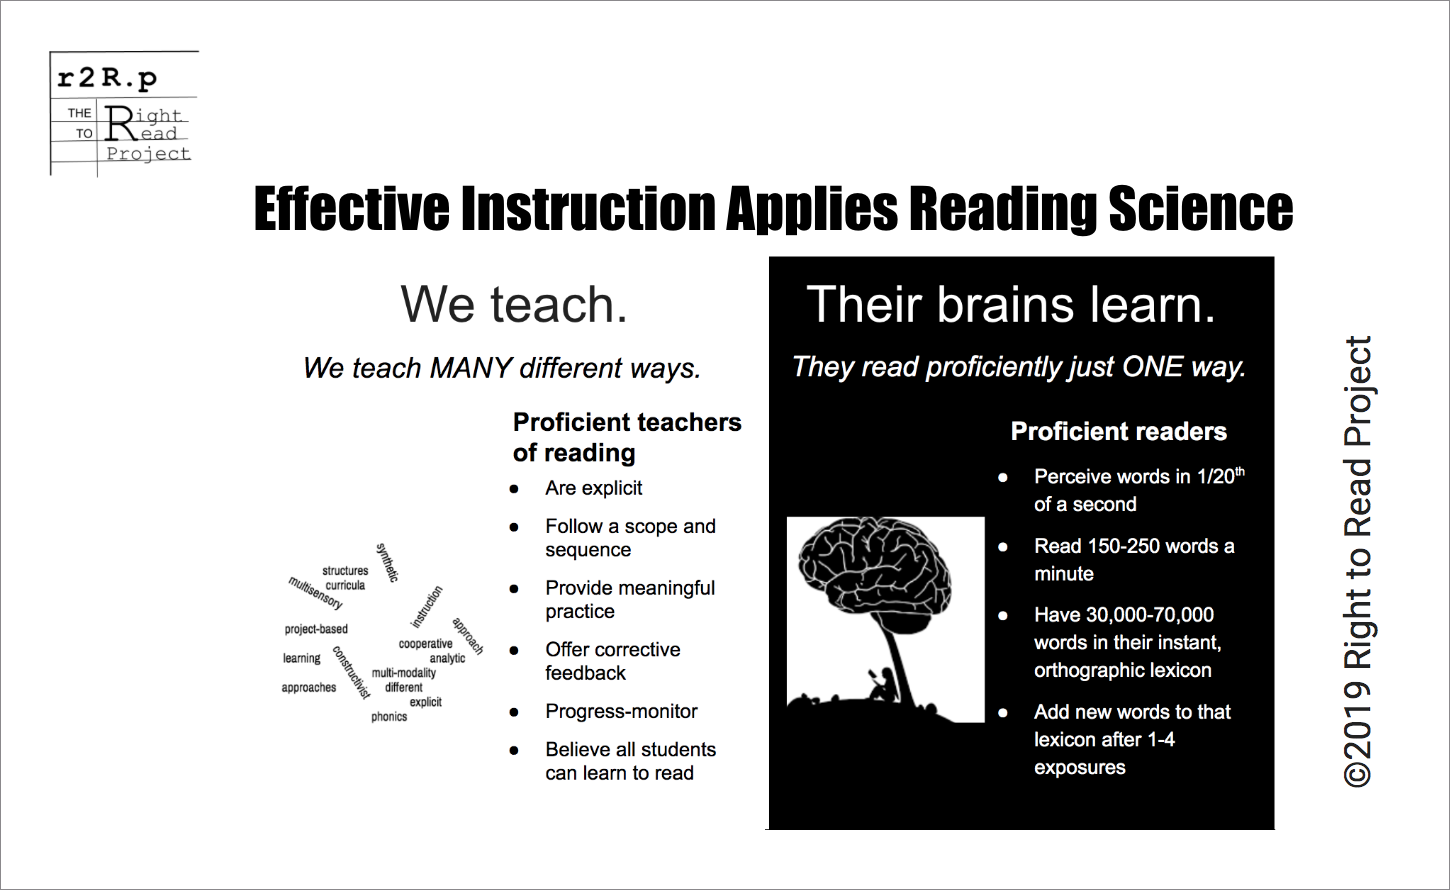 Teaching reading and learning infographic